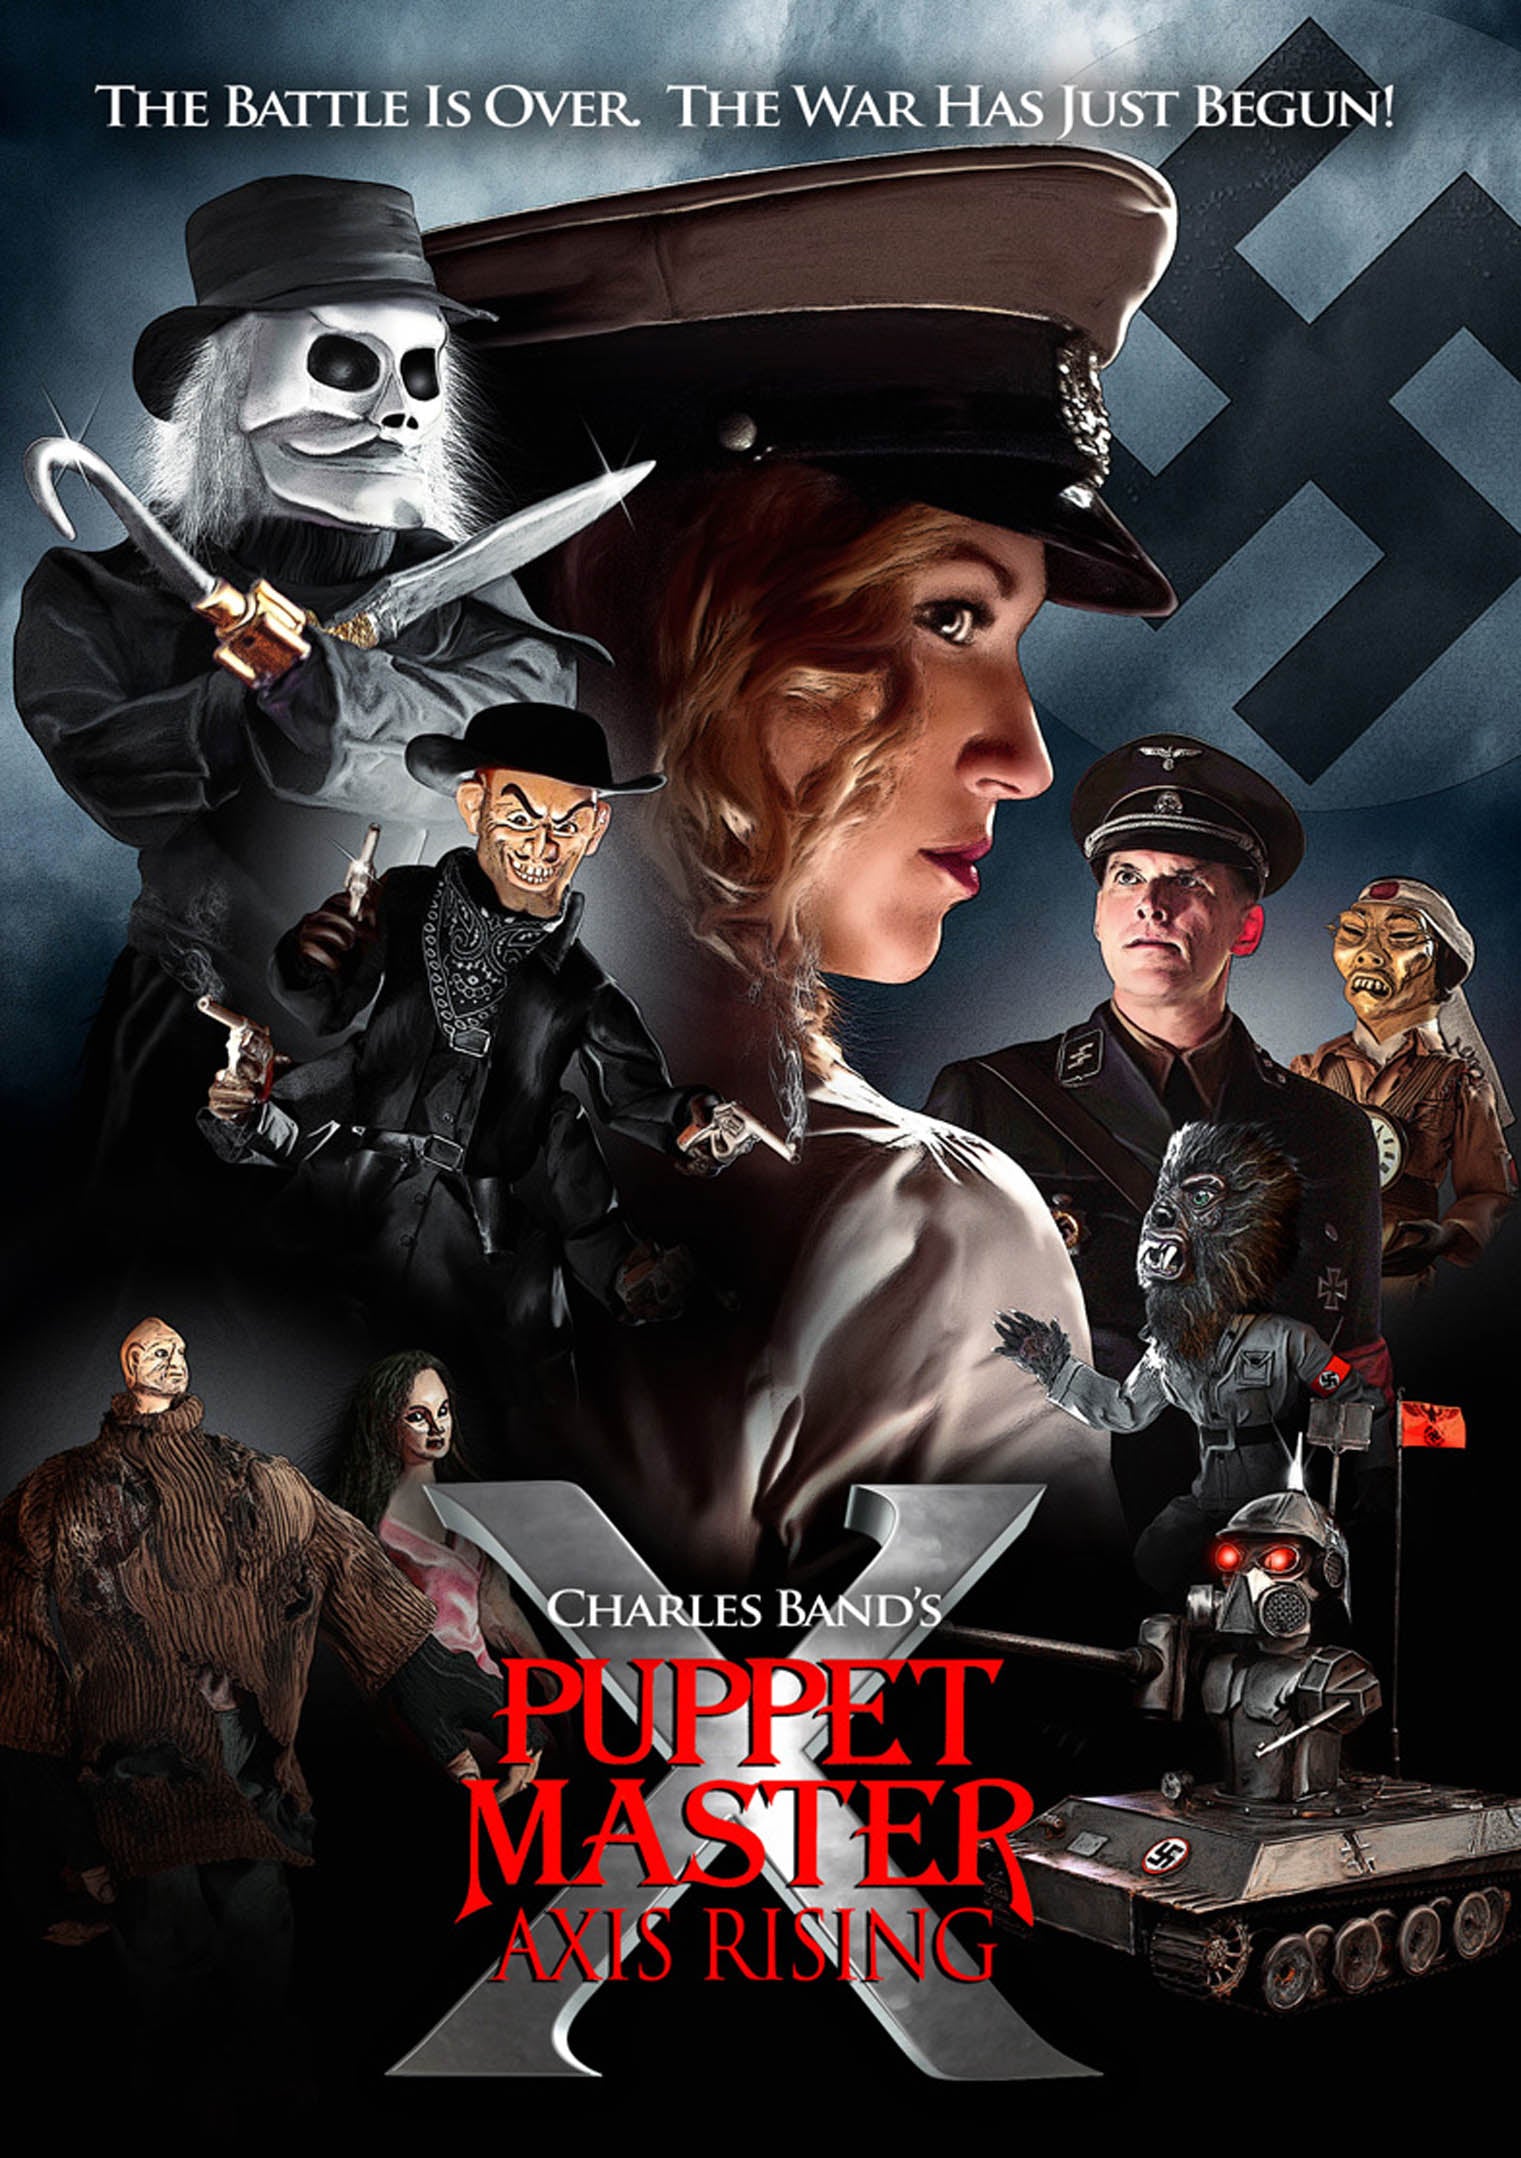 PUPPET MASTER X: AXIS RISING DVD